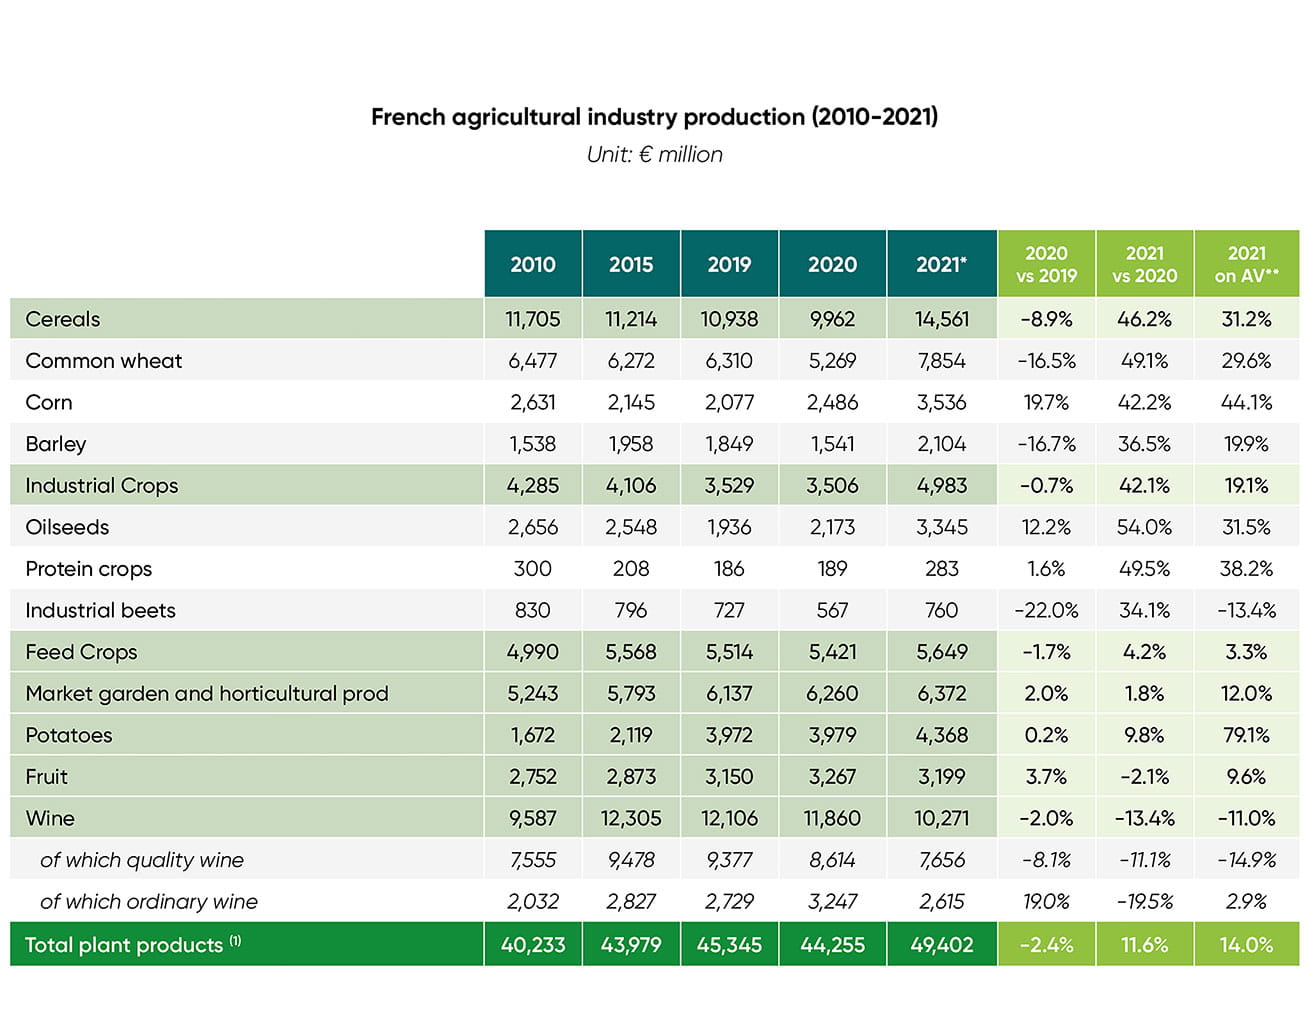 Infographic on French agricultural production by product (2017-2022)